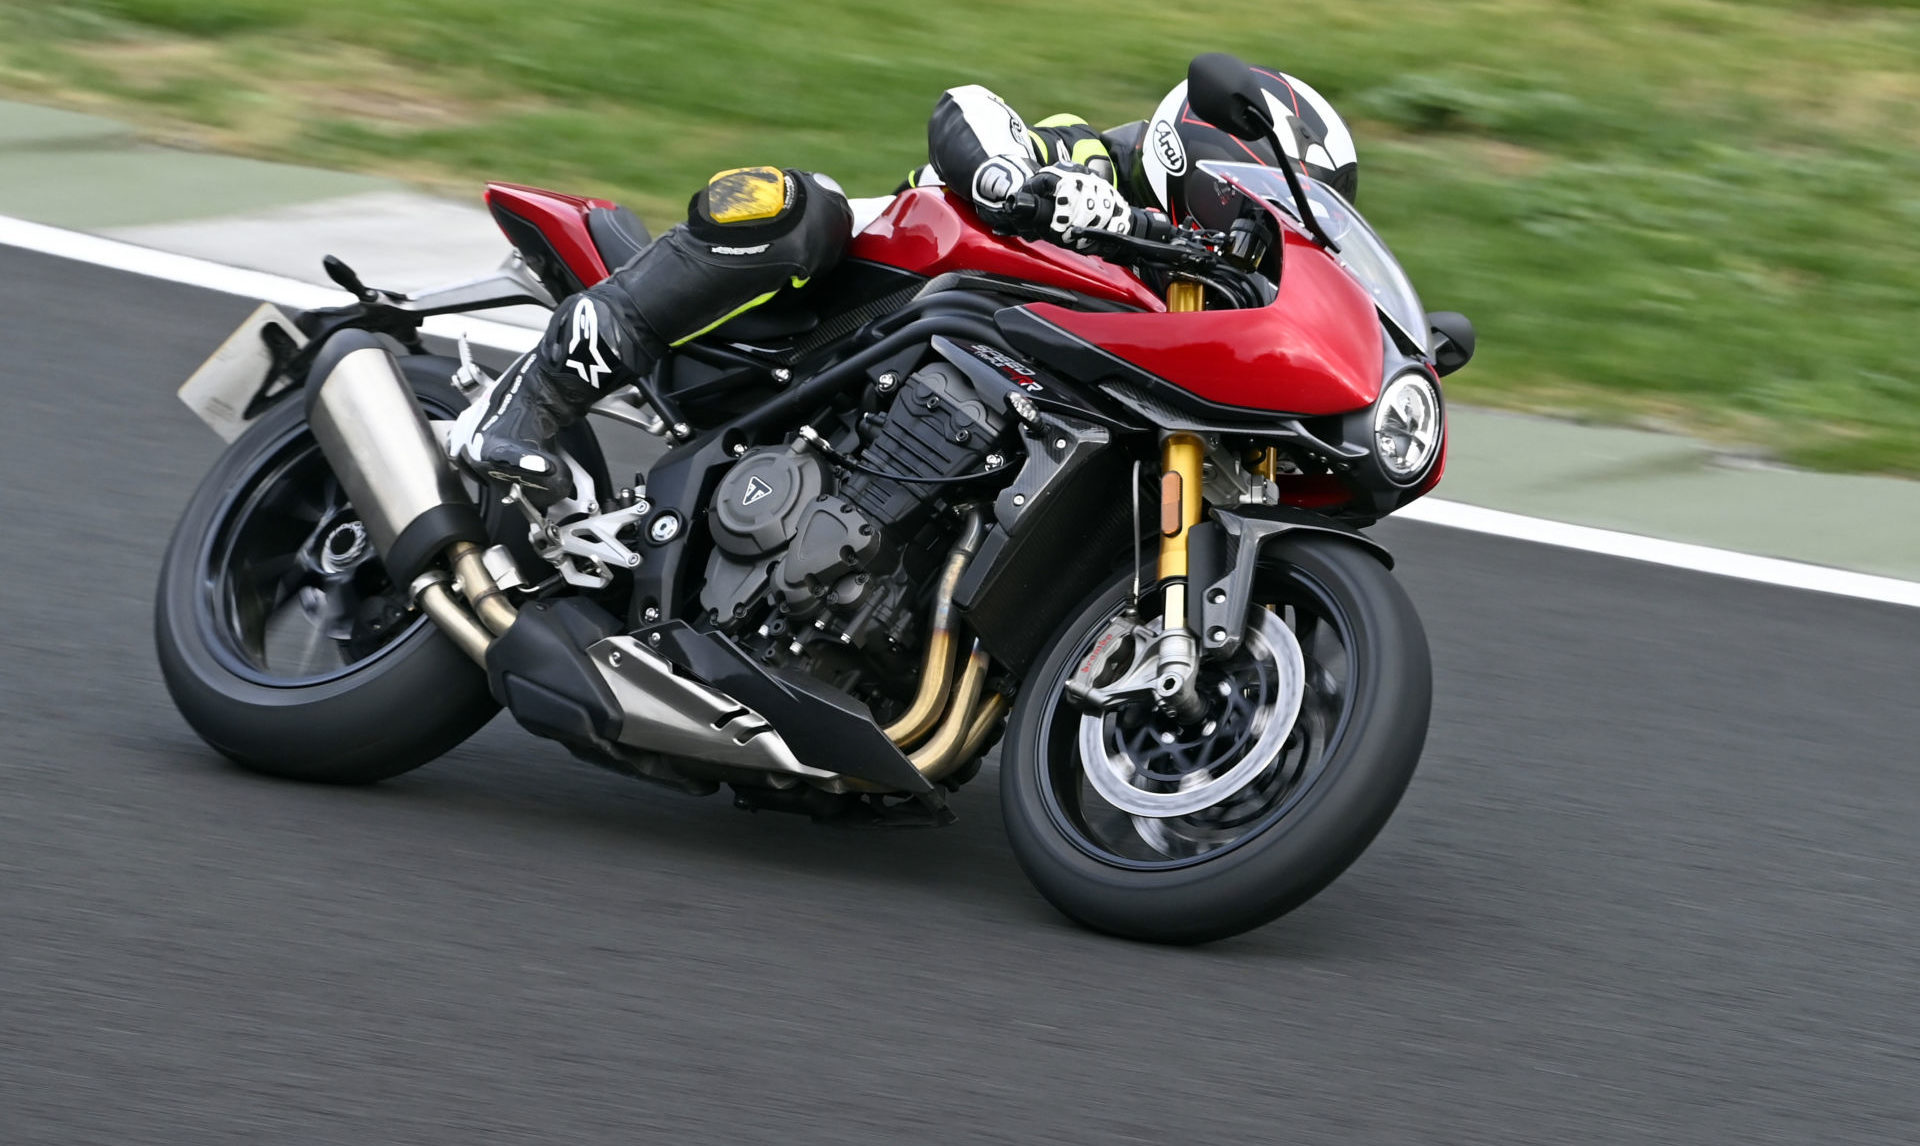 While the Triumph Speed Triple RR is designed for street use, its power (and the usability of that power), and its stable but still nimble chassis, sophisticated suspension, and solid brakes mean that it is quite comfortable on a racetrack. Photo courtesy Triumph.